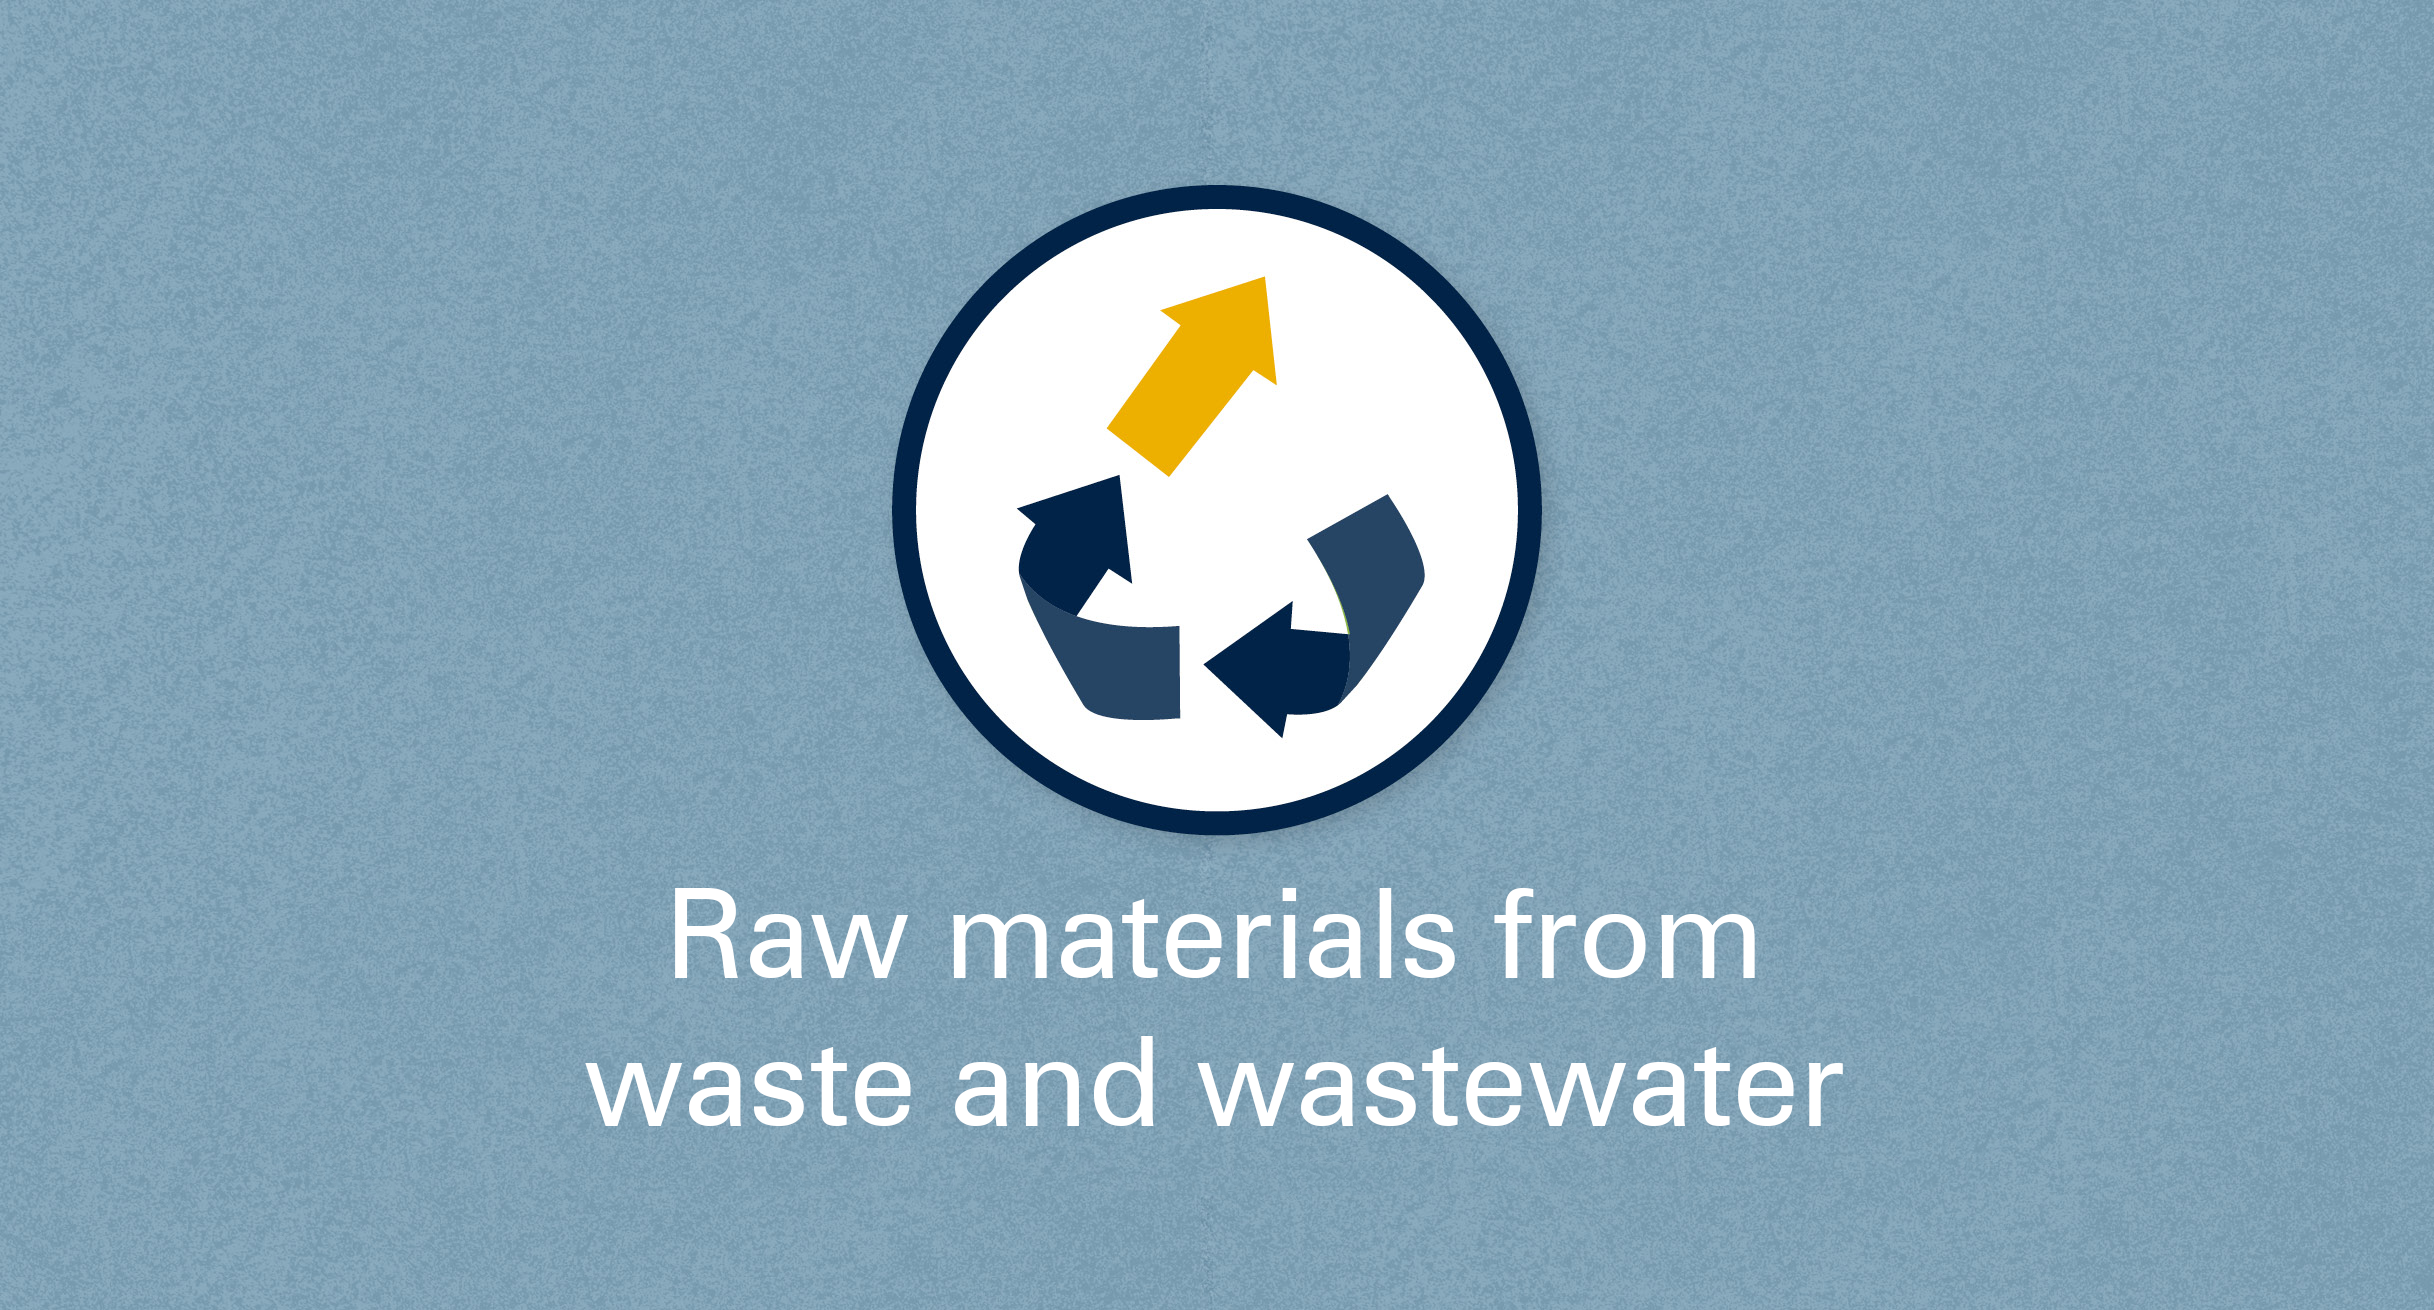 Sustainable Bioeconomy: Icon for raw materials from waste and wastewater